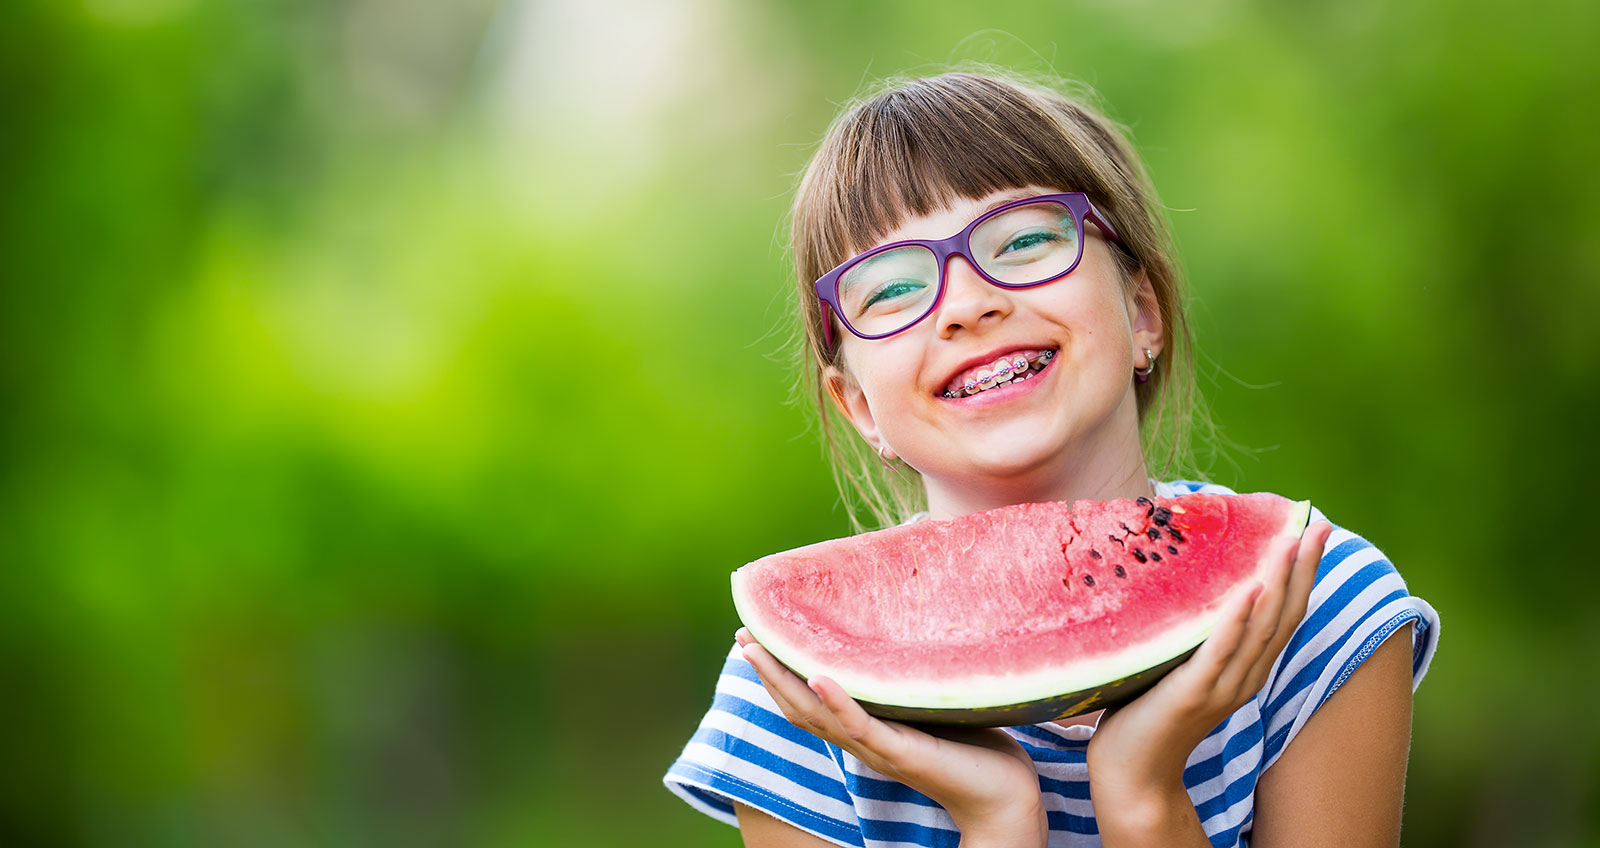 Young girl with glasses eating watermelon.